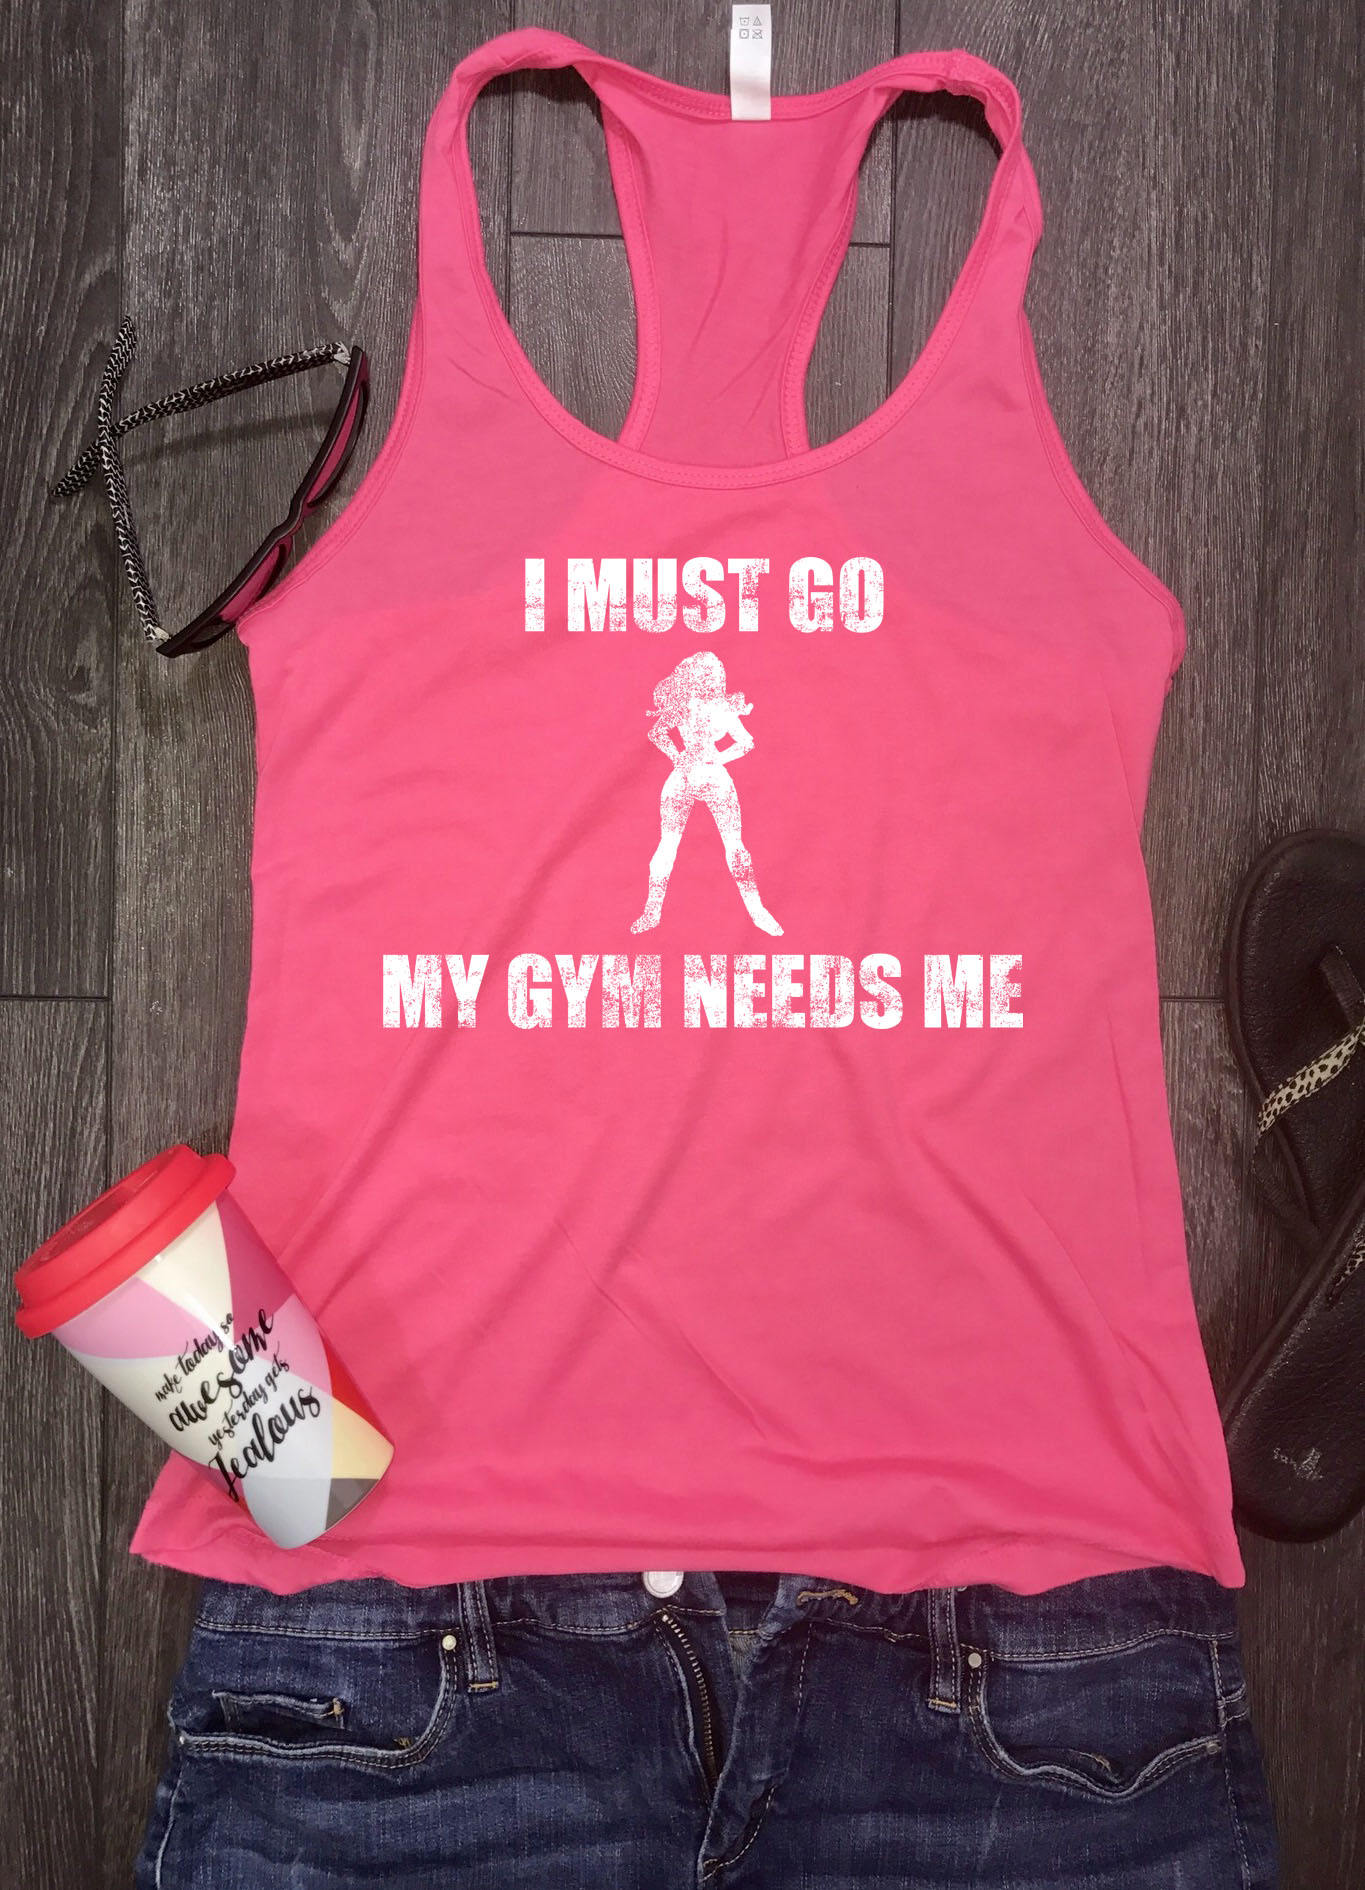 I must go my gym needs me workout tank, funny workout tank, superhero -  Living Limitless Clothing Co.